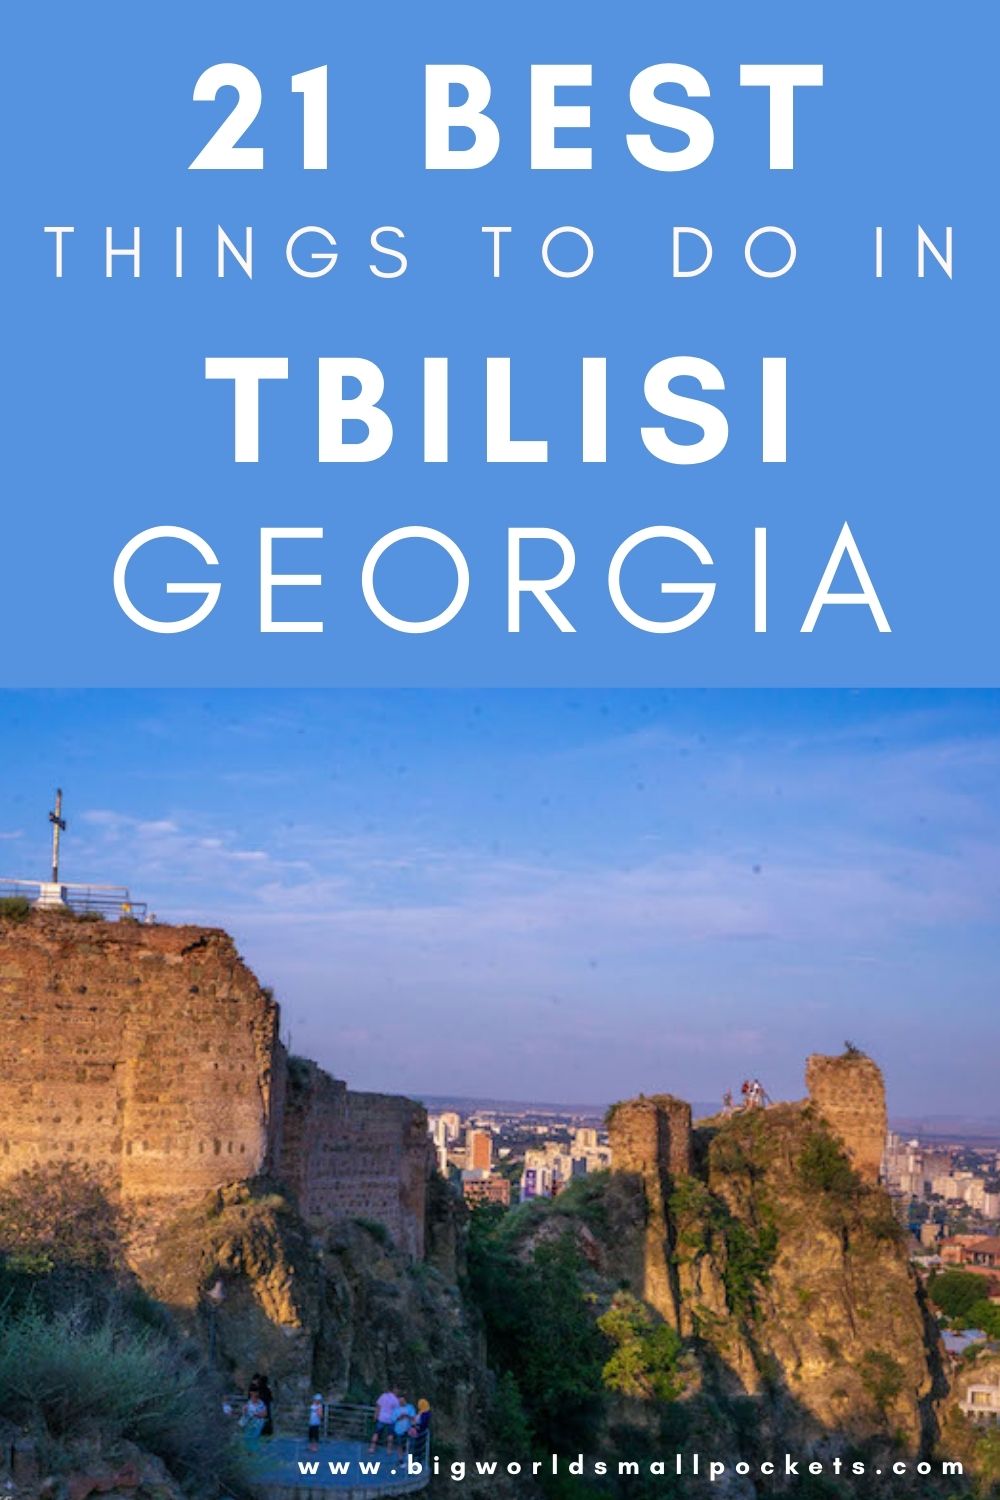 21 Best Things to Do in Tbilisi, Georgia